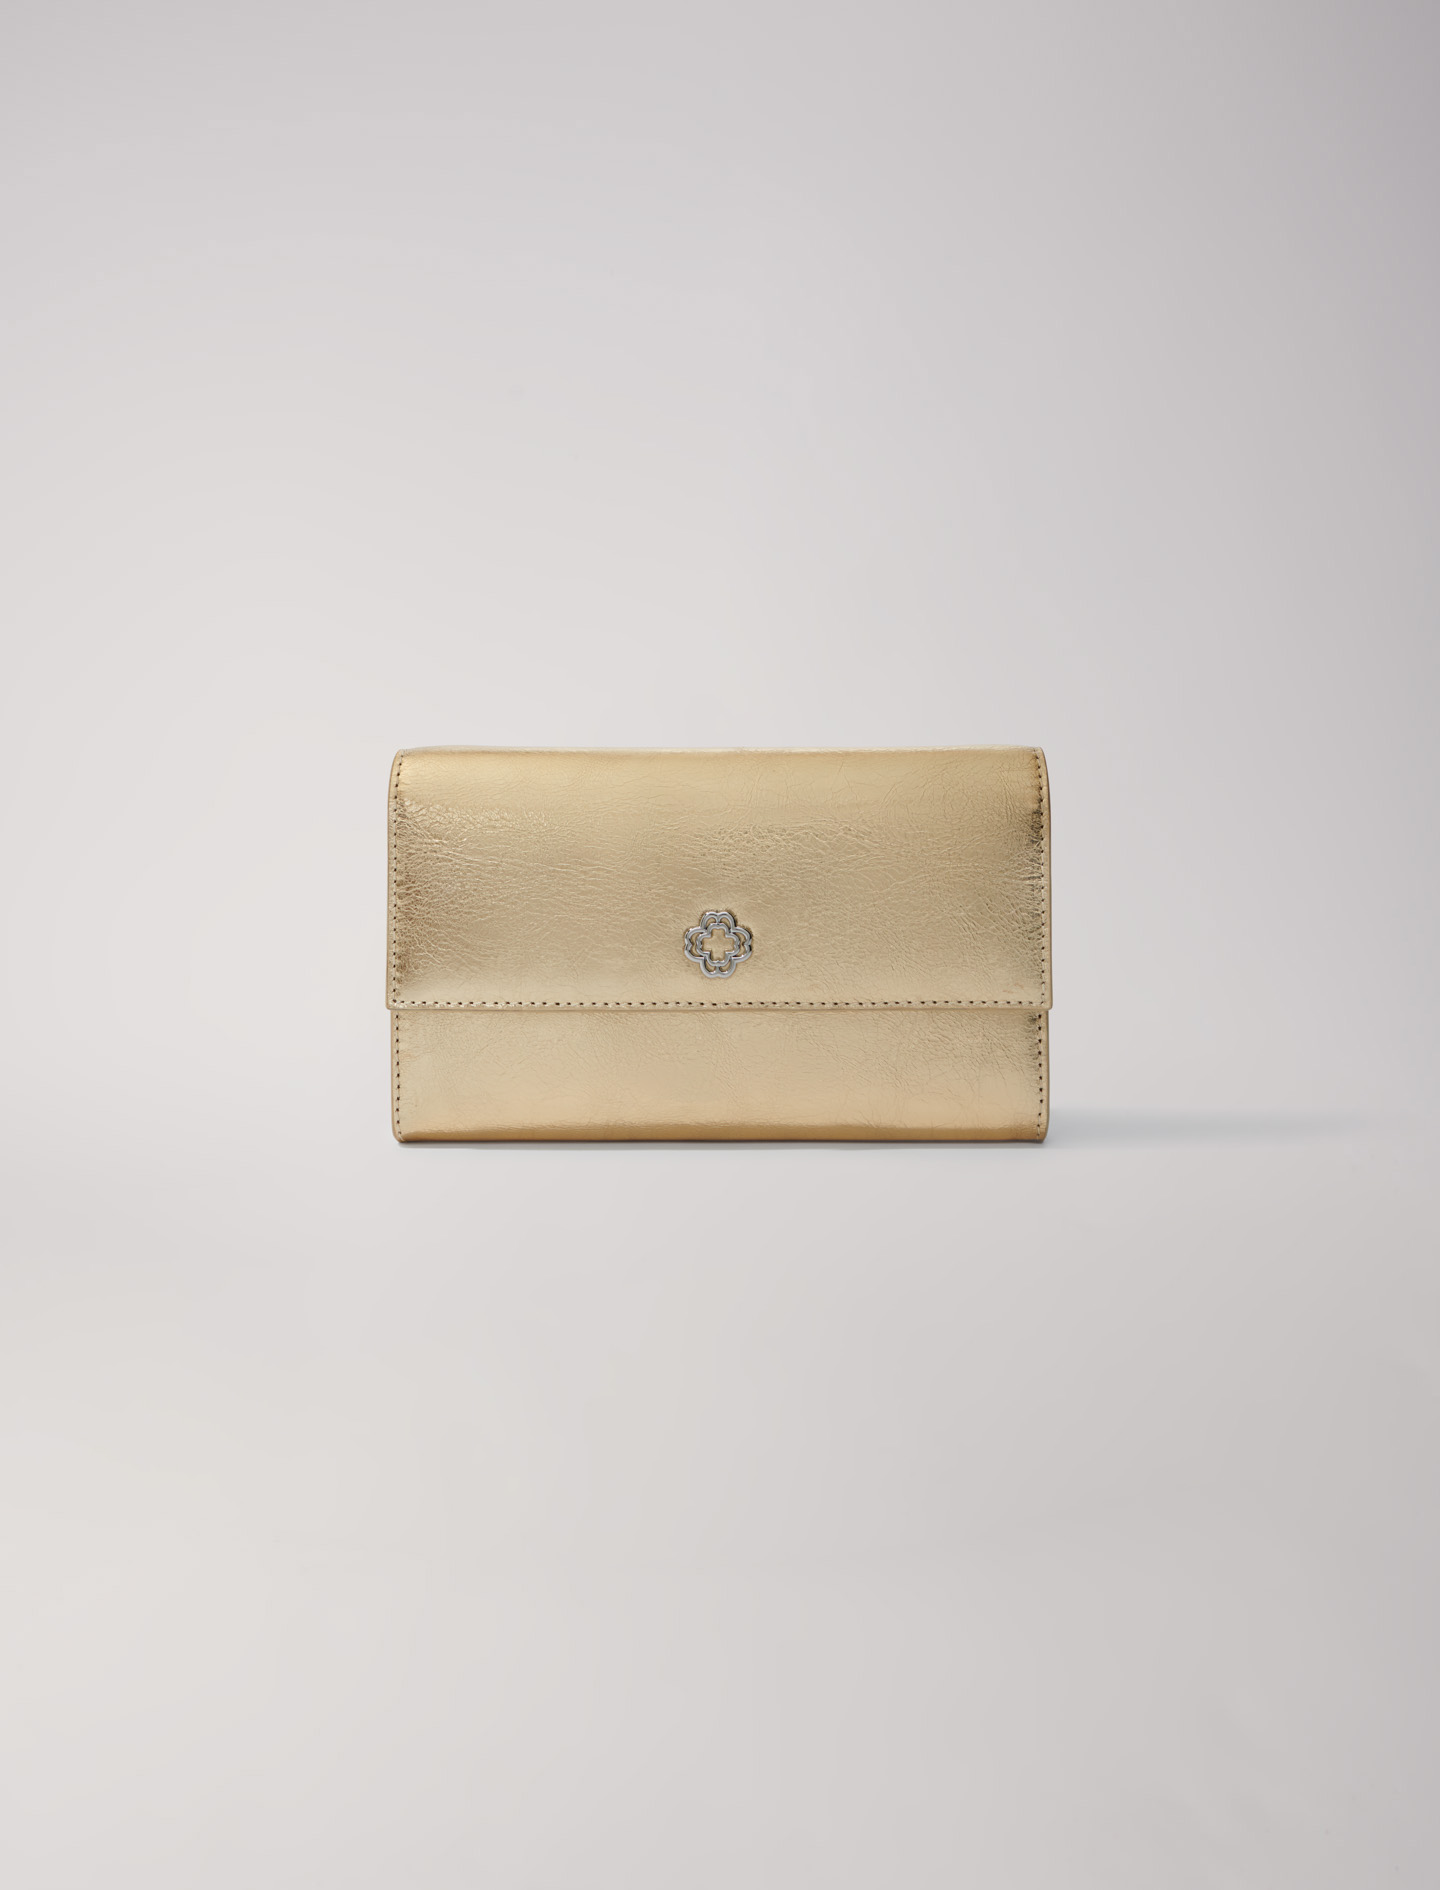 Mixte's polyurethane Chain: Leather clutch bag with chain, size Mixte-Small leather goods-OS (ONE SIZE), in color Gold / Yellow